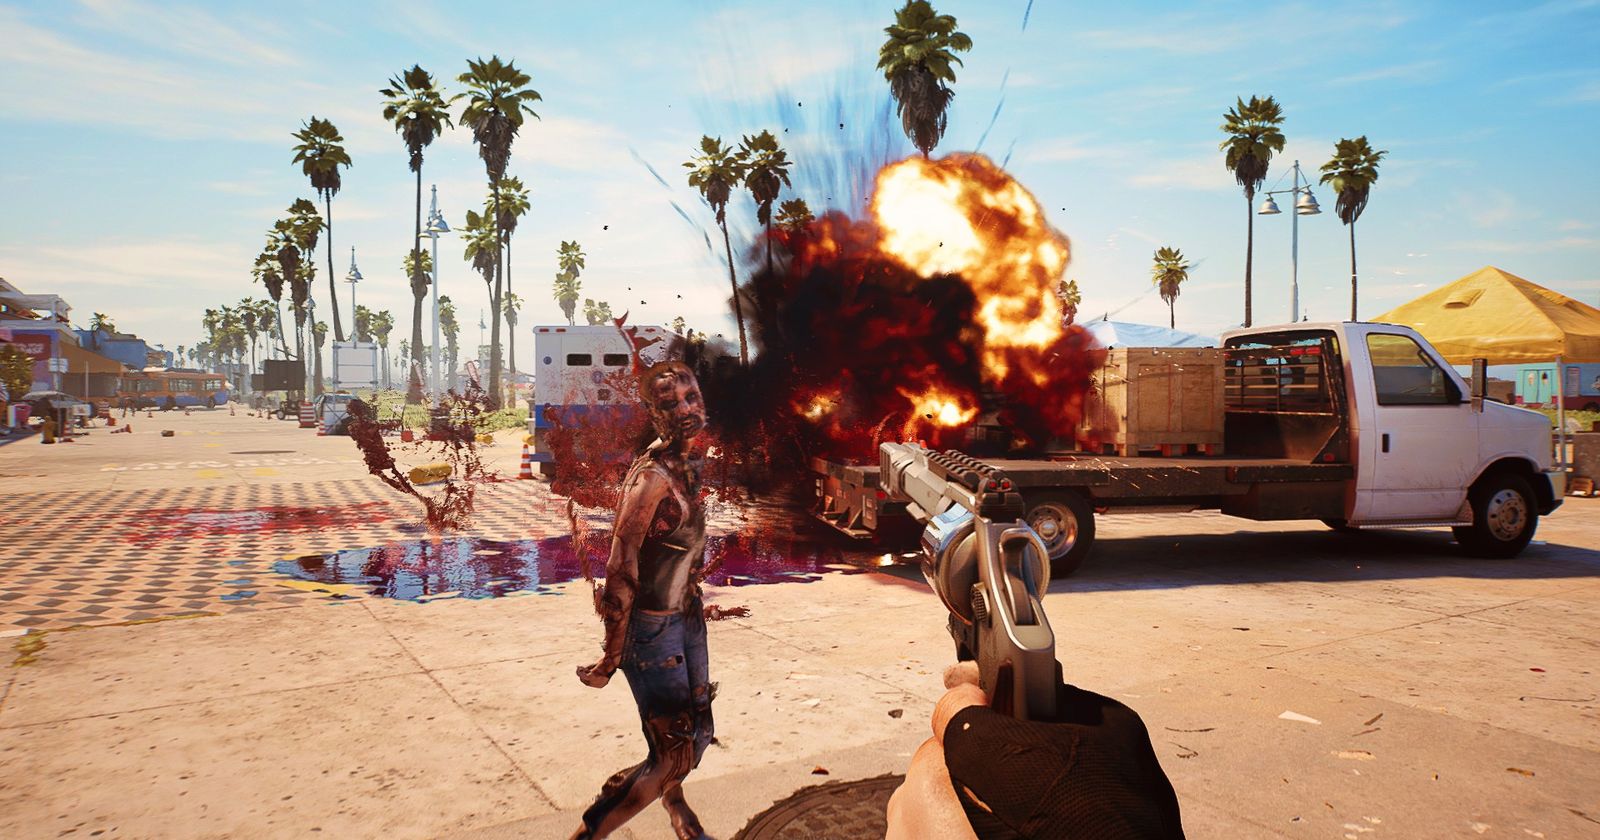 Dead Island 2 release times for all regions